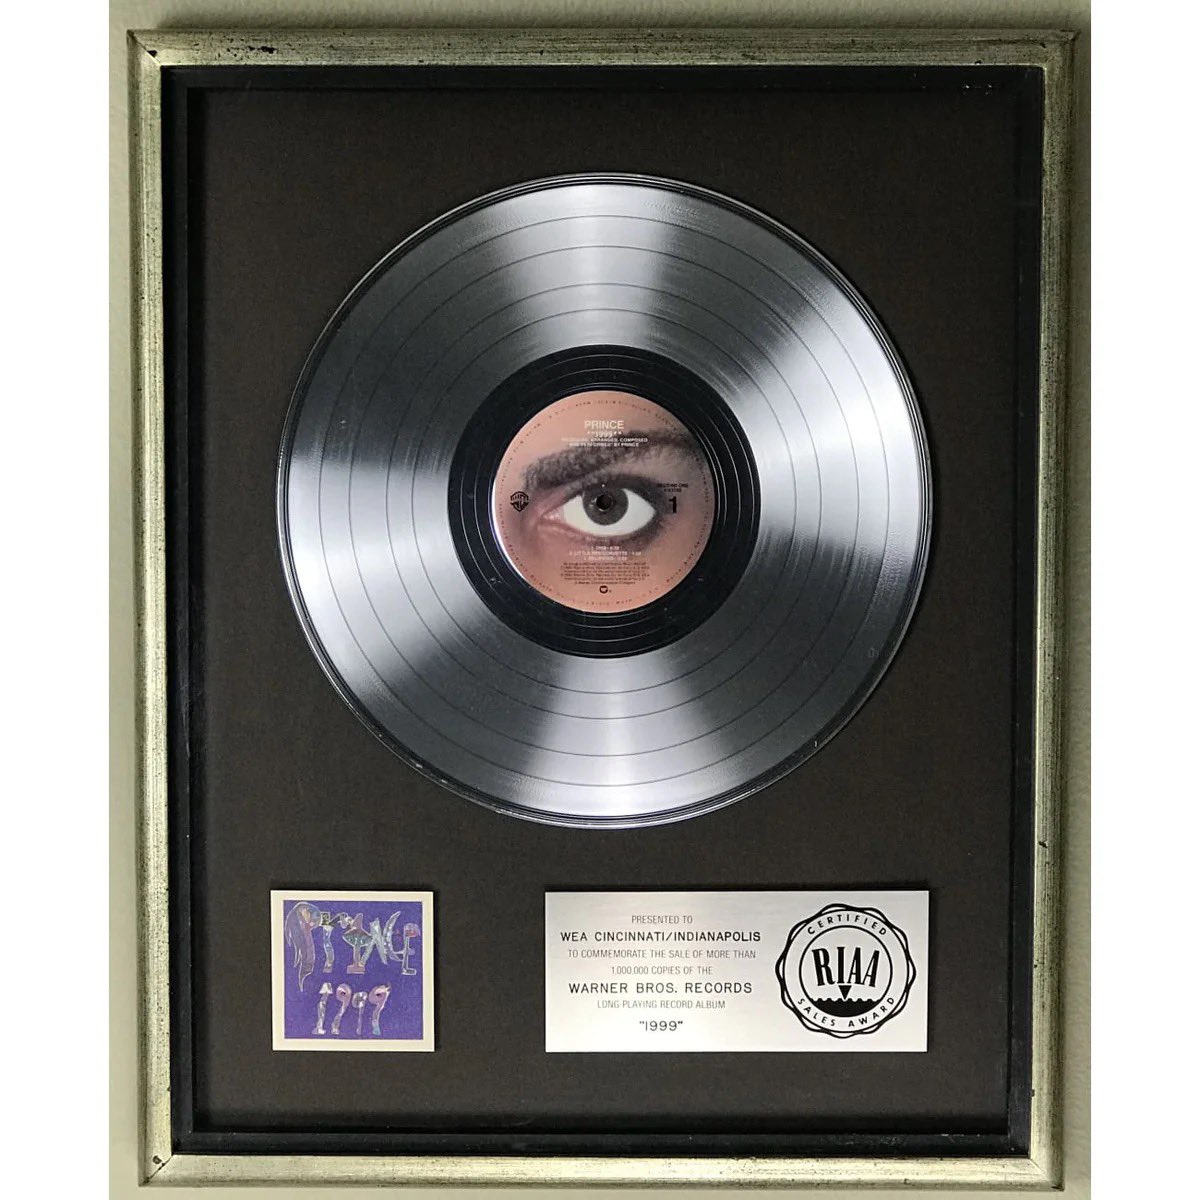 On this day in 1983, Prince's fifth studio album 1999 was certified platinum (1 million units sold) by the RIAA.  It would ultimately sell more than 4 million copies.